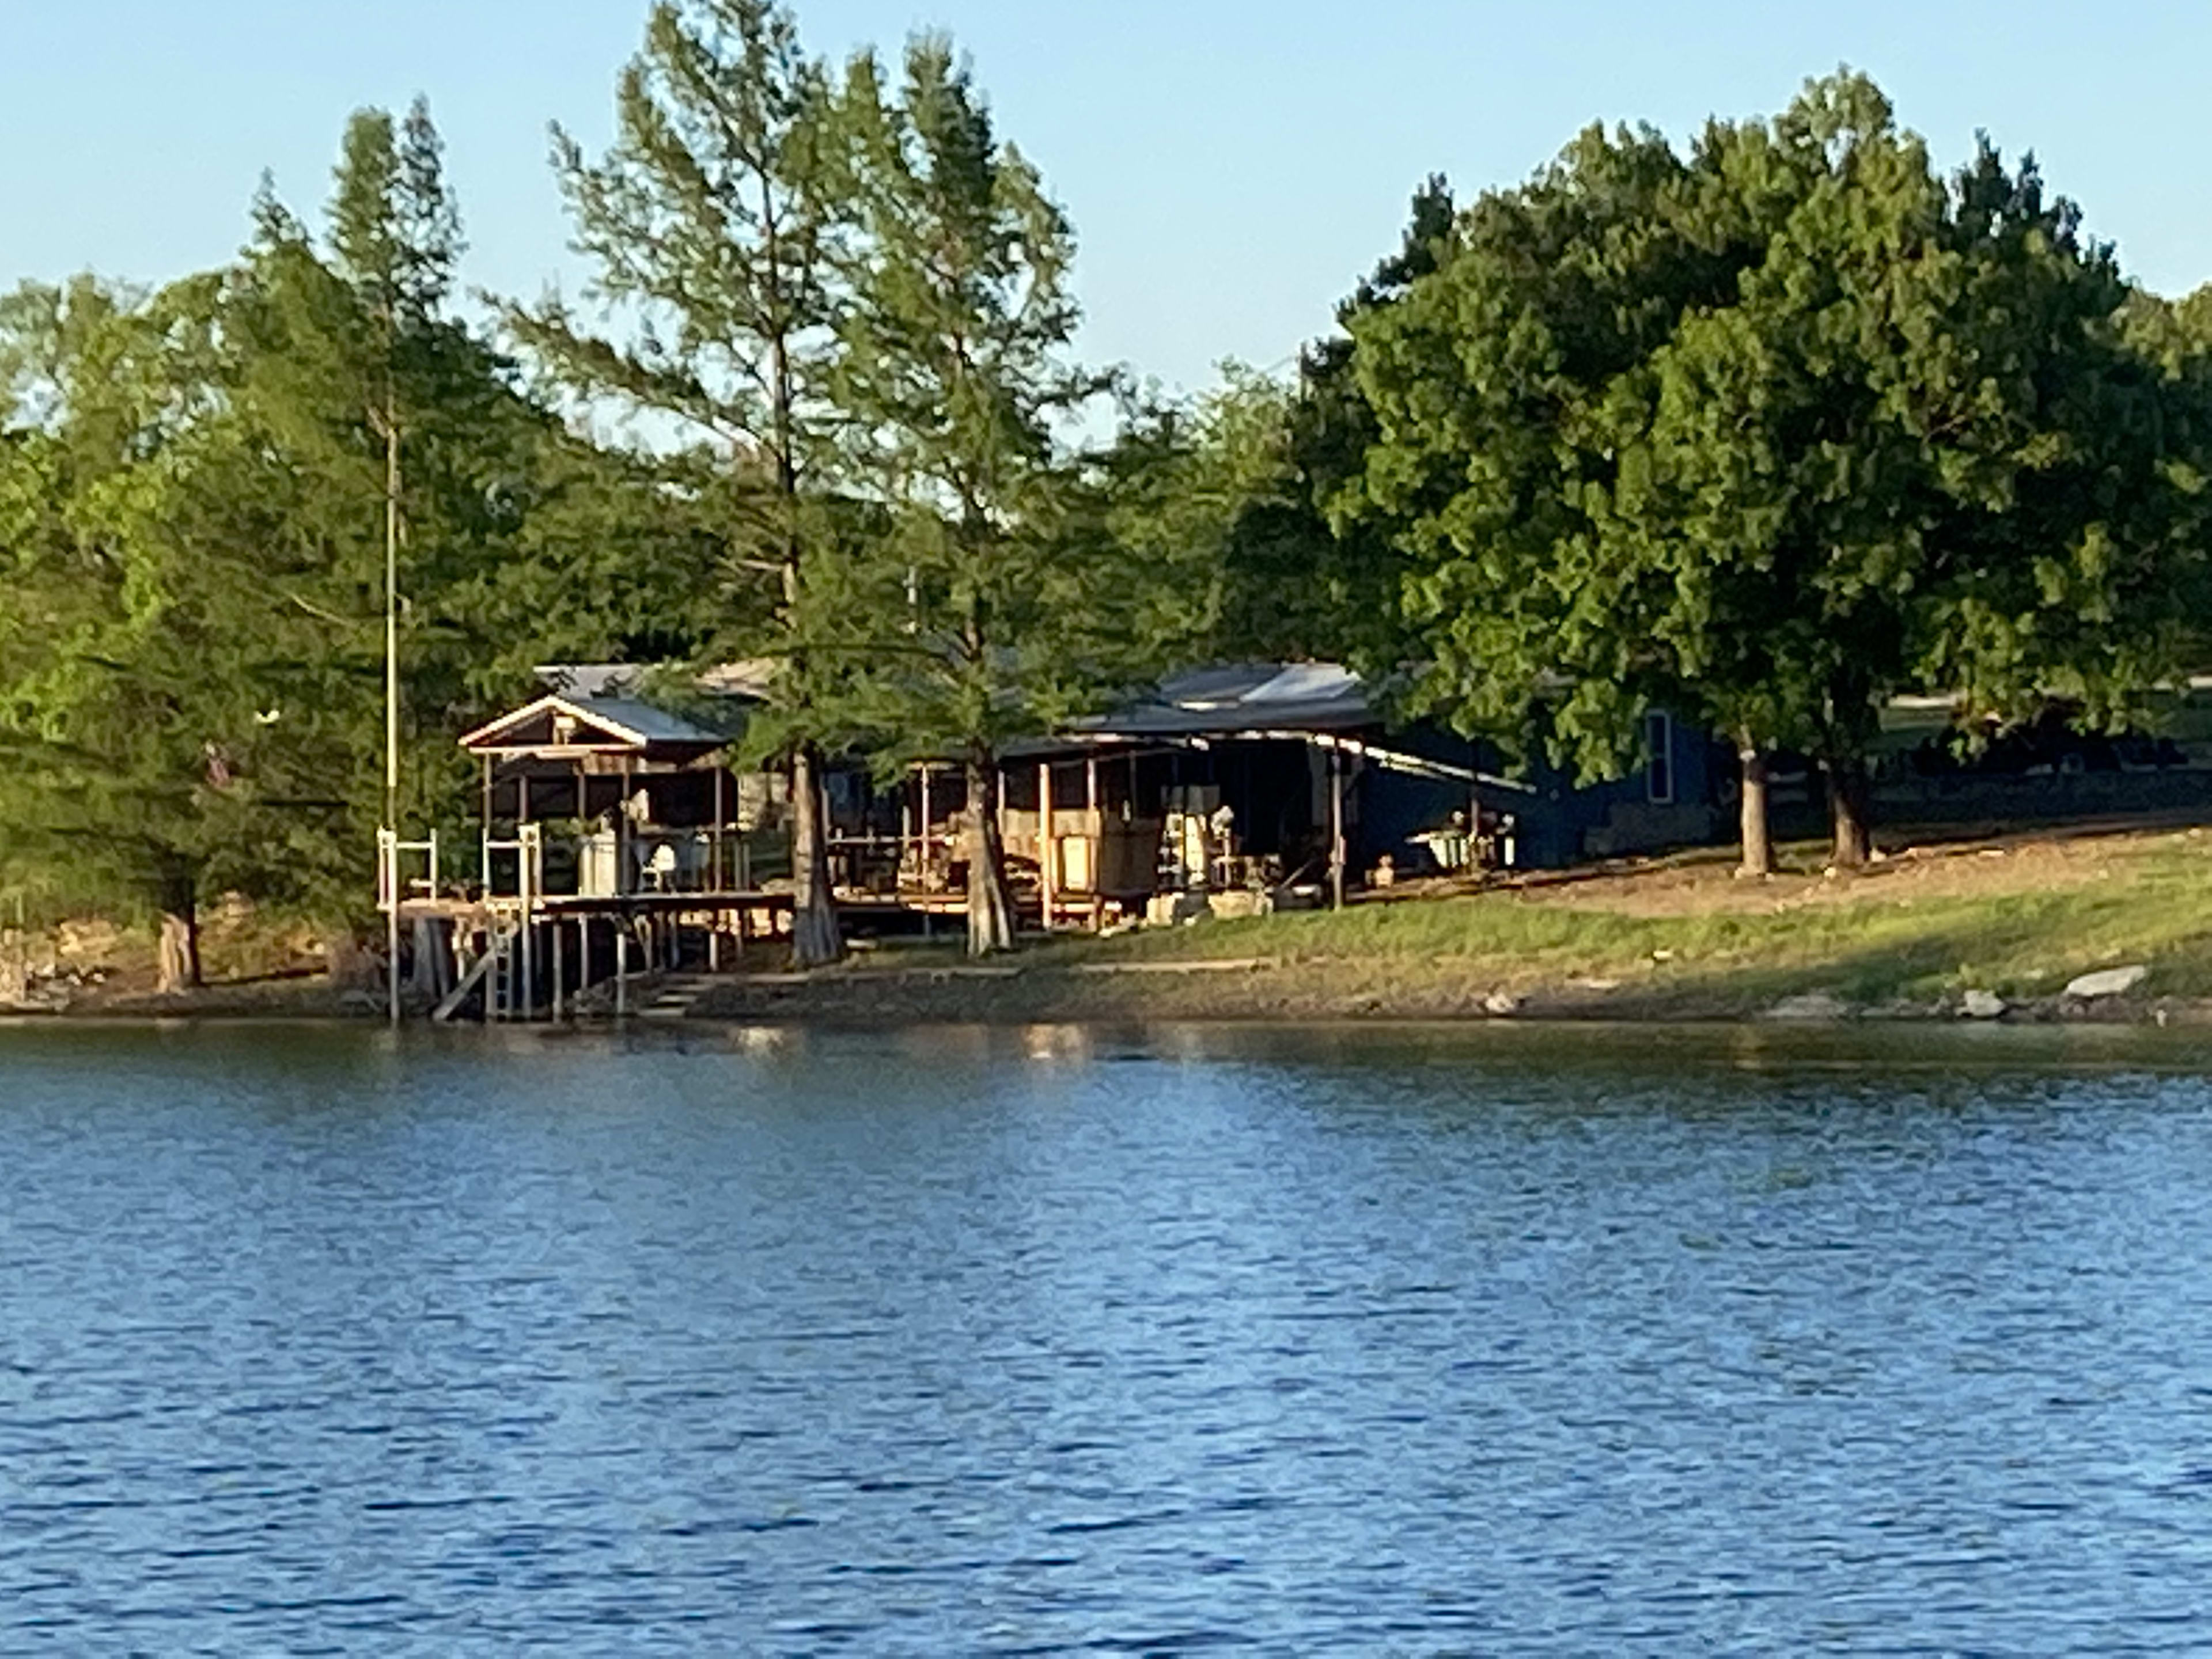 Back porch and dock